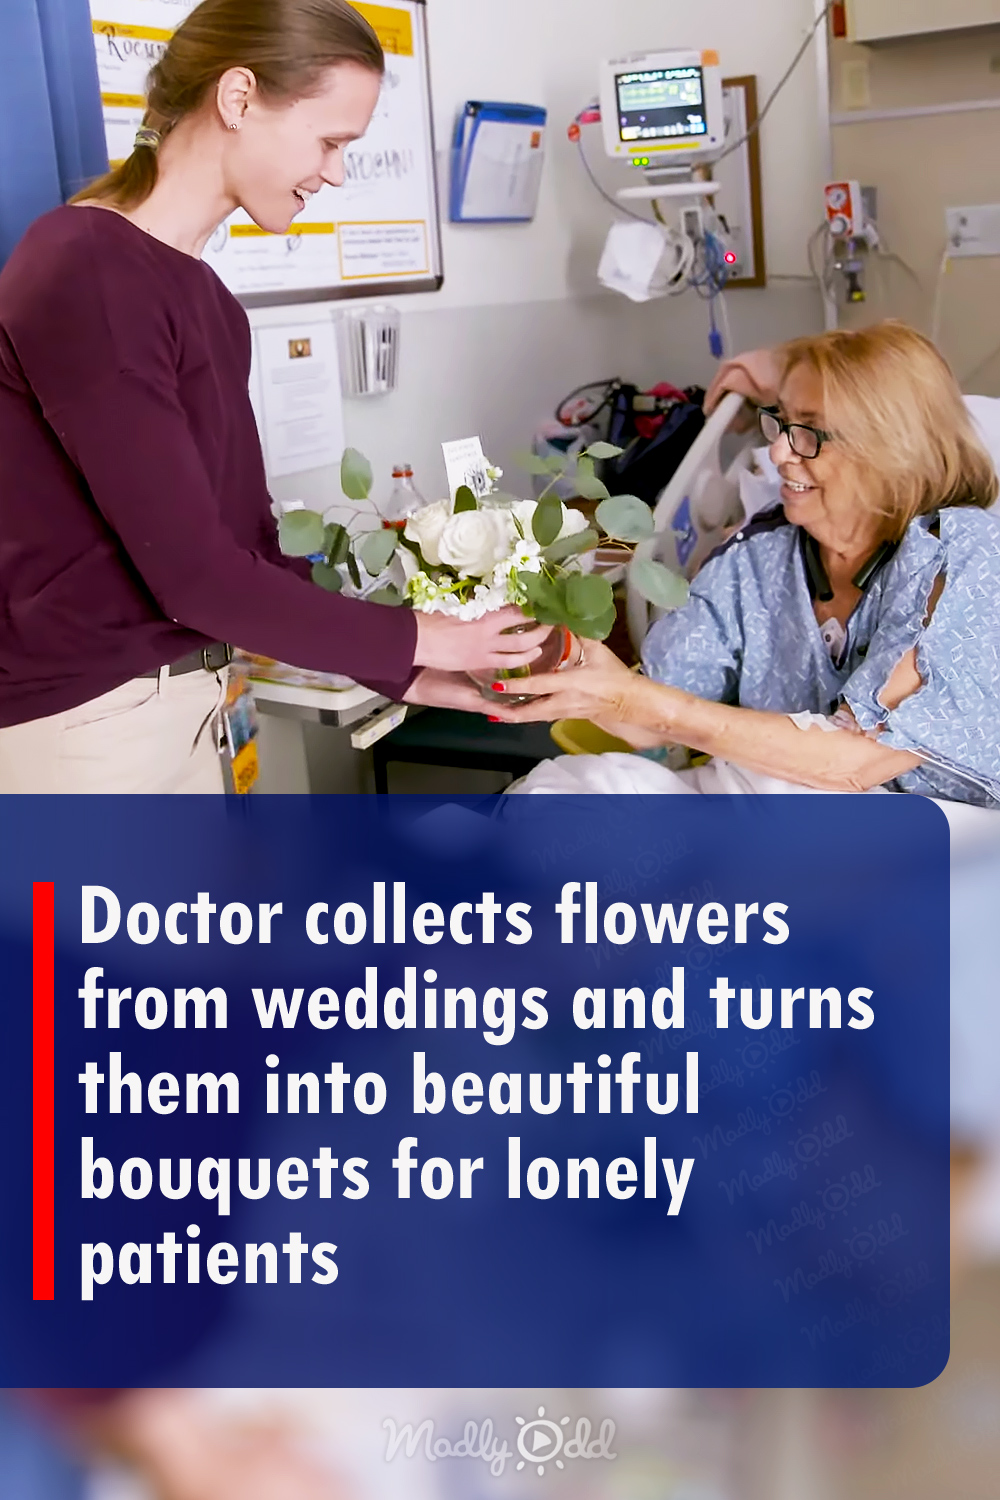 Doctor collects flowers from weddings and turns them into beautiful bouquets for lonely patients